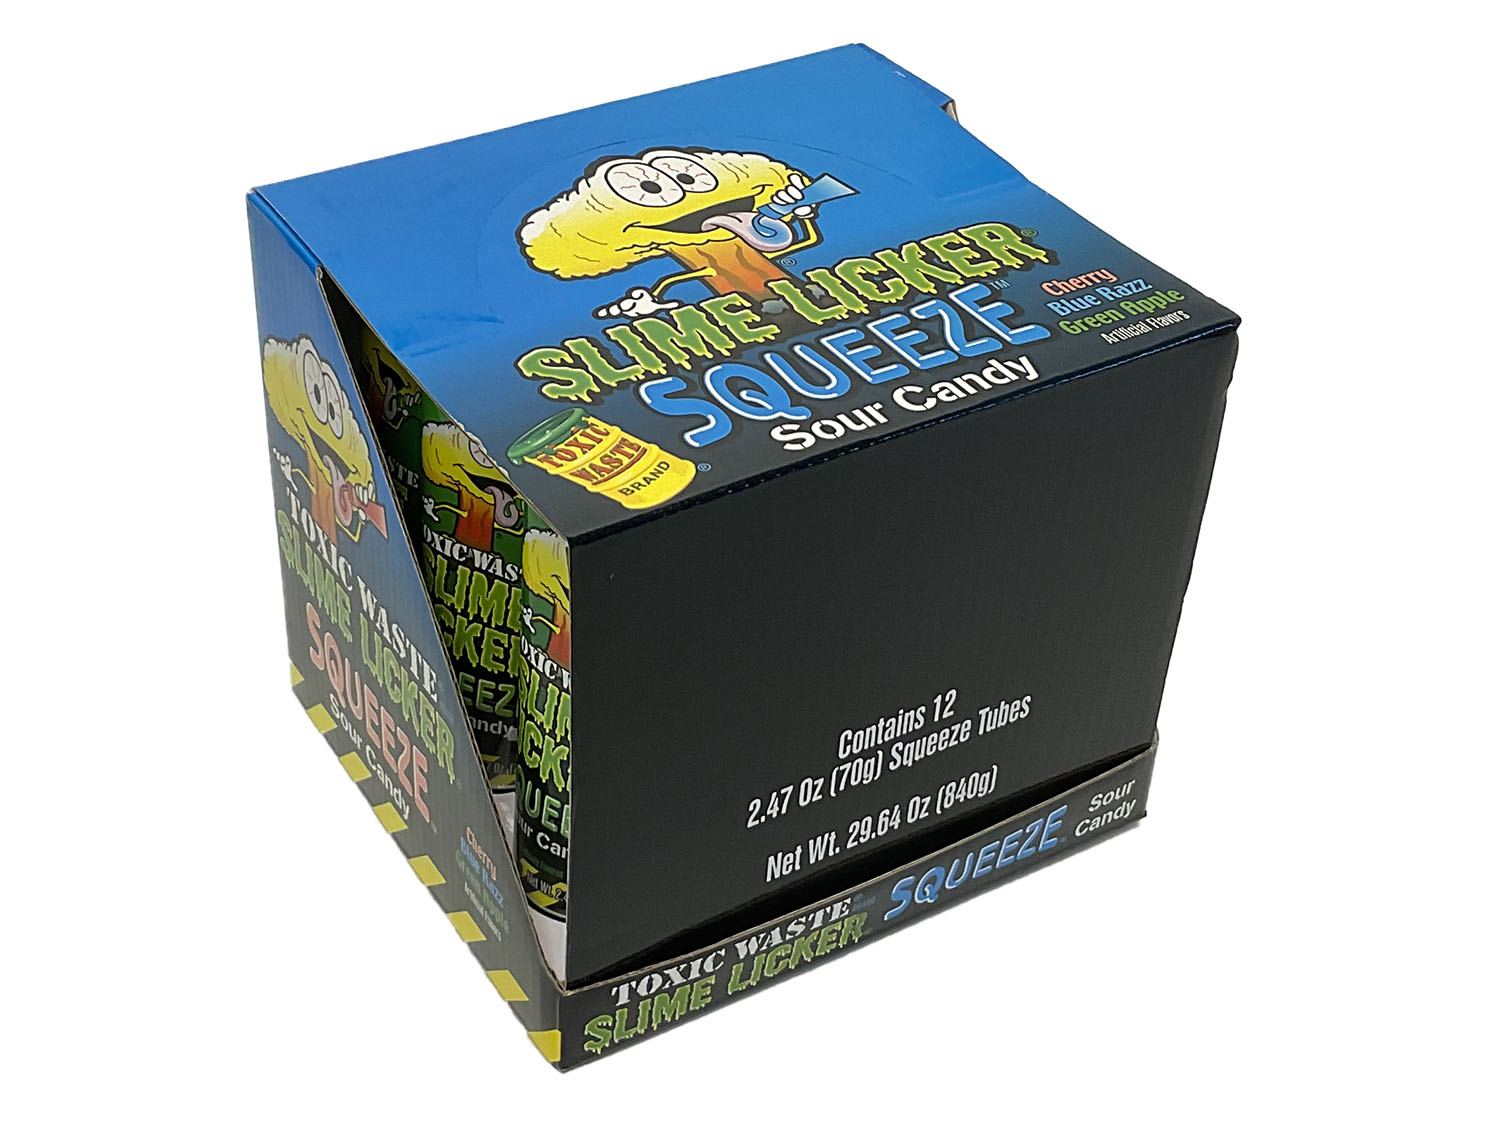  Squeeze Sour Candy 3 Slime Lickers 2.47 Oz Tubes of